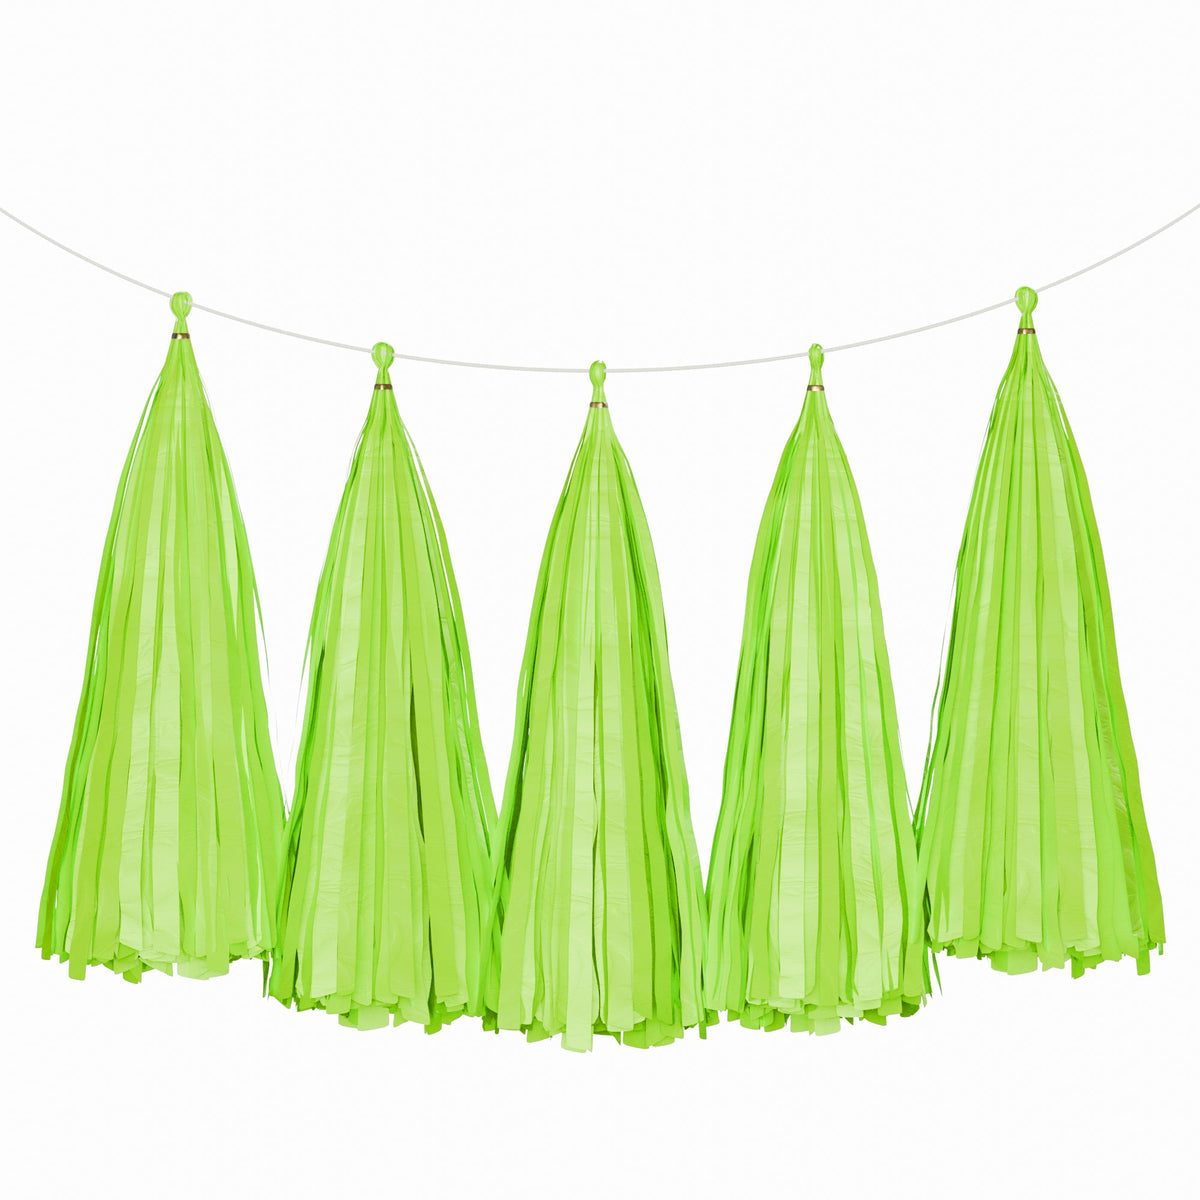 Weifang Mayshine Imp&exp co Decorations Lime Tassel Garland, 5 Count 810064197246